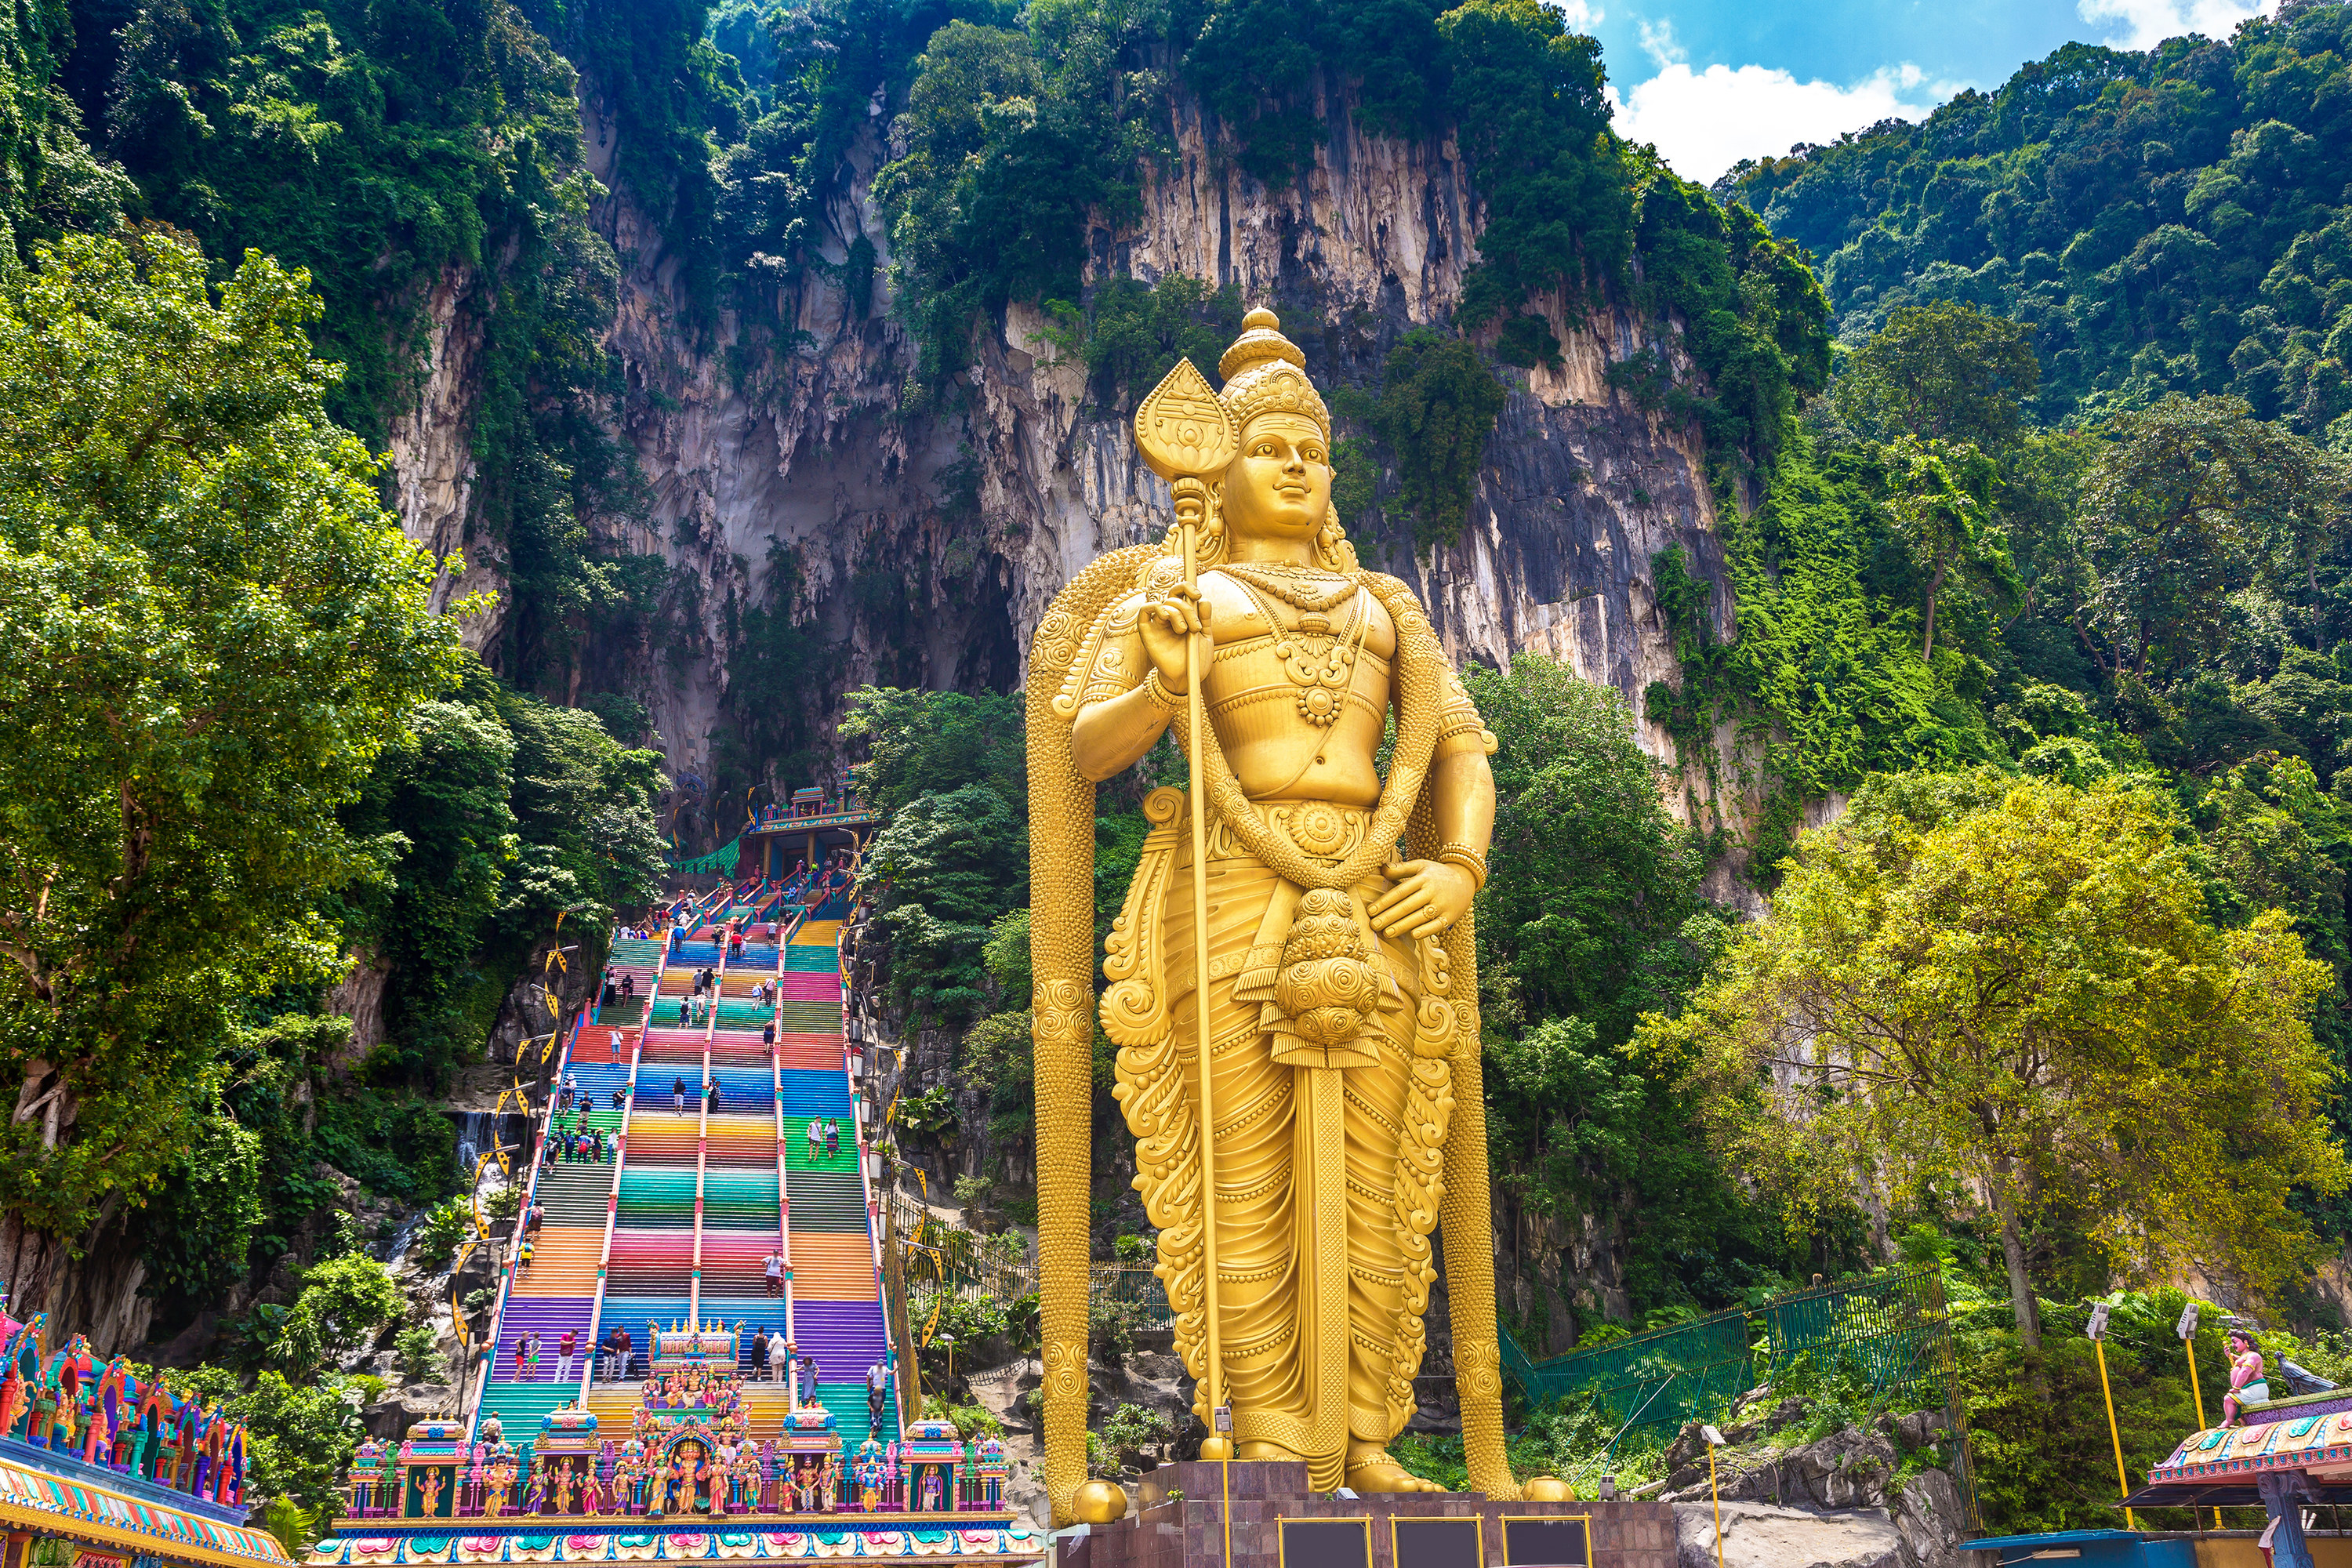 Giant gold Buddha in front of towering mountains